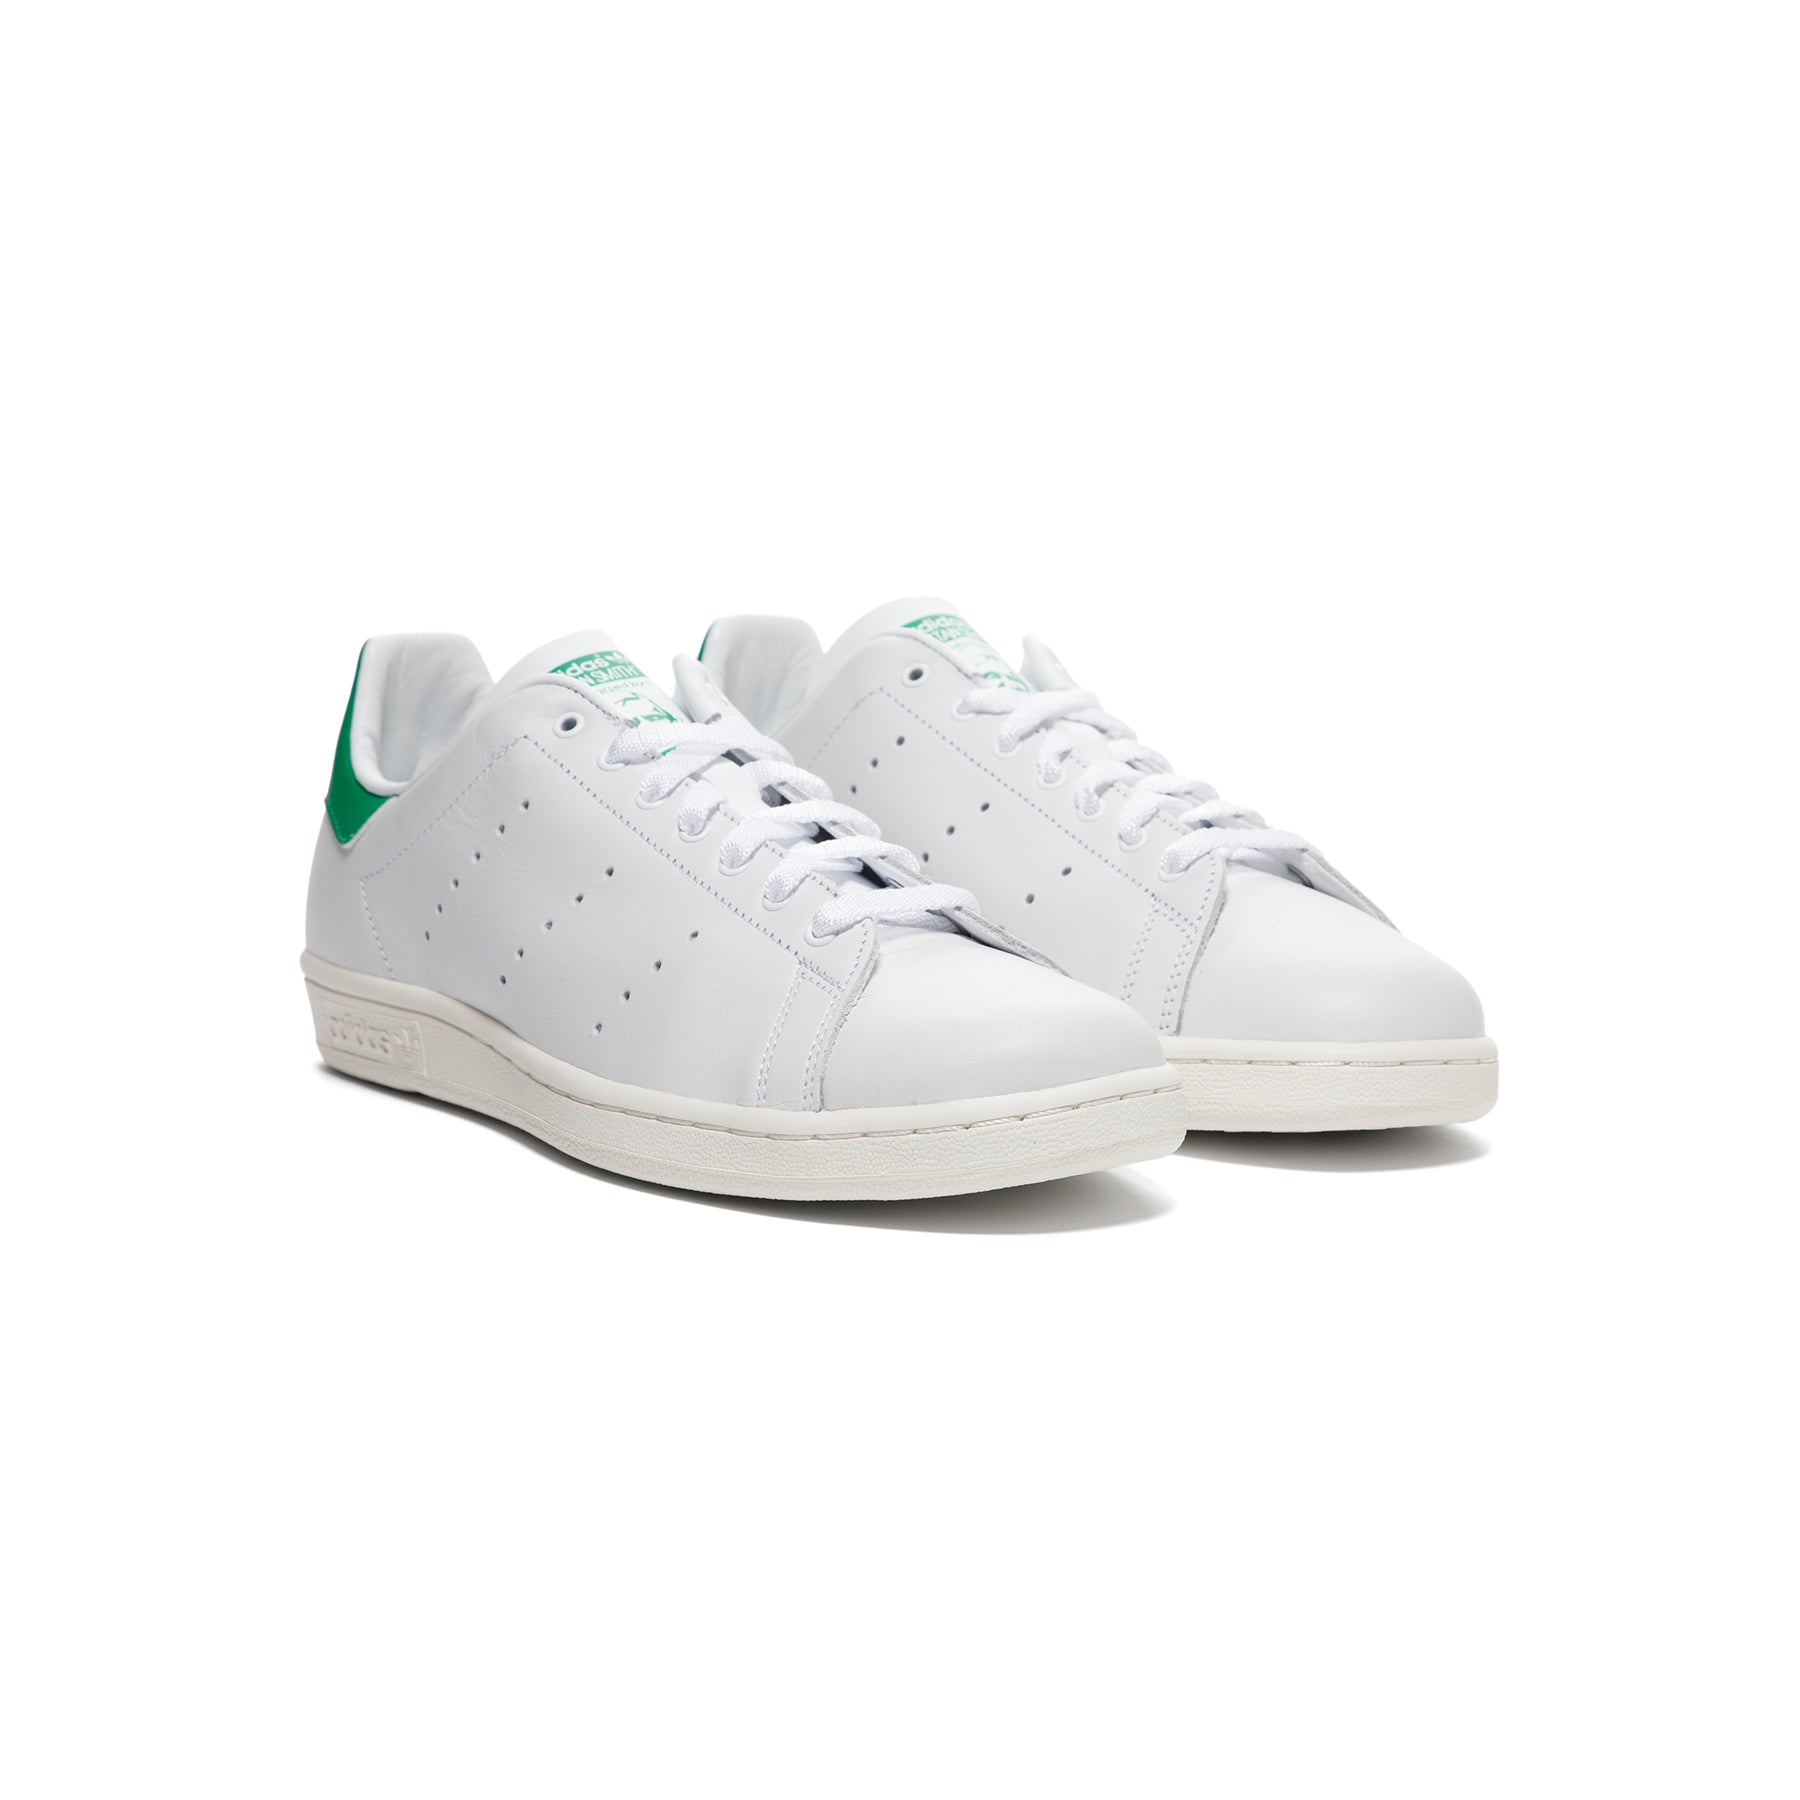 adidas Stan Smith 80s (Cloud White/Green) Concepts